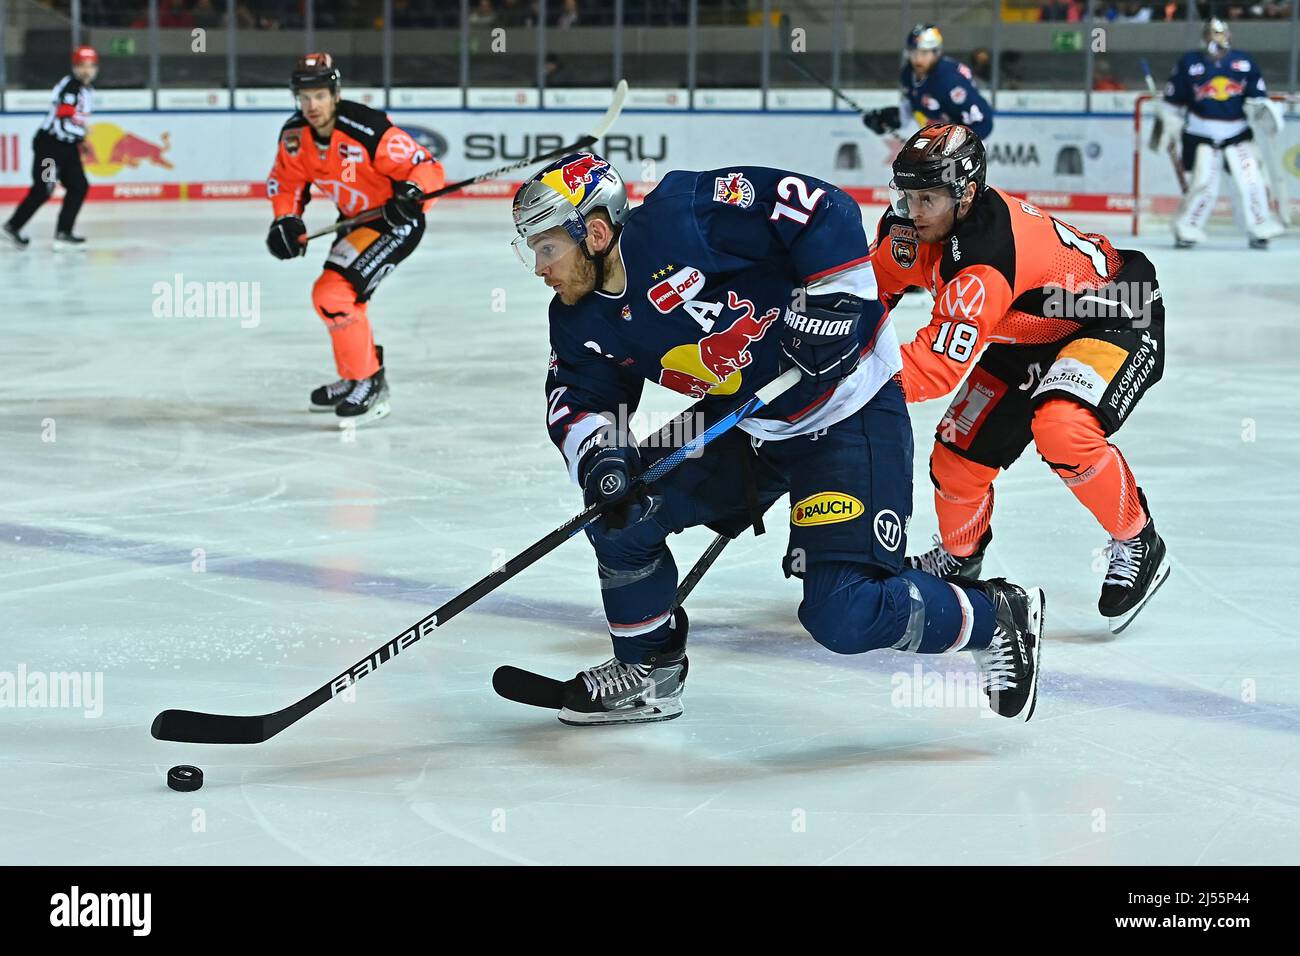 Munich, Germany. 20th Apr, 2022. Ice hockey: DEL, EHC Red Bull Munich - Grizzlies Wolfsburg, championship round, semifinal, 1st game day, Olympia-Eissportzentrum: Munich's Benjamin Smith (l.) fights with Wolfsburg's Anthony Rech for the puck. Credit: Lennart Preiss/dpa/Alamy Live News Stock Photo